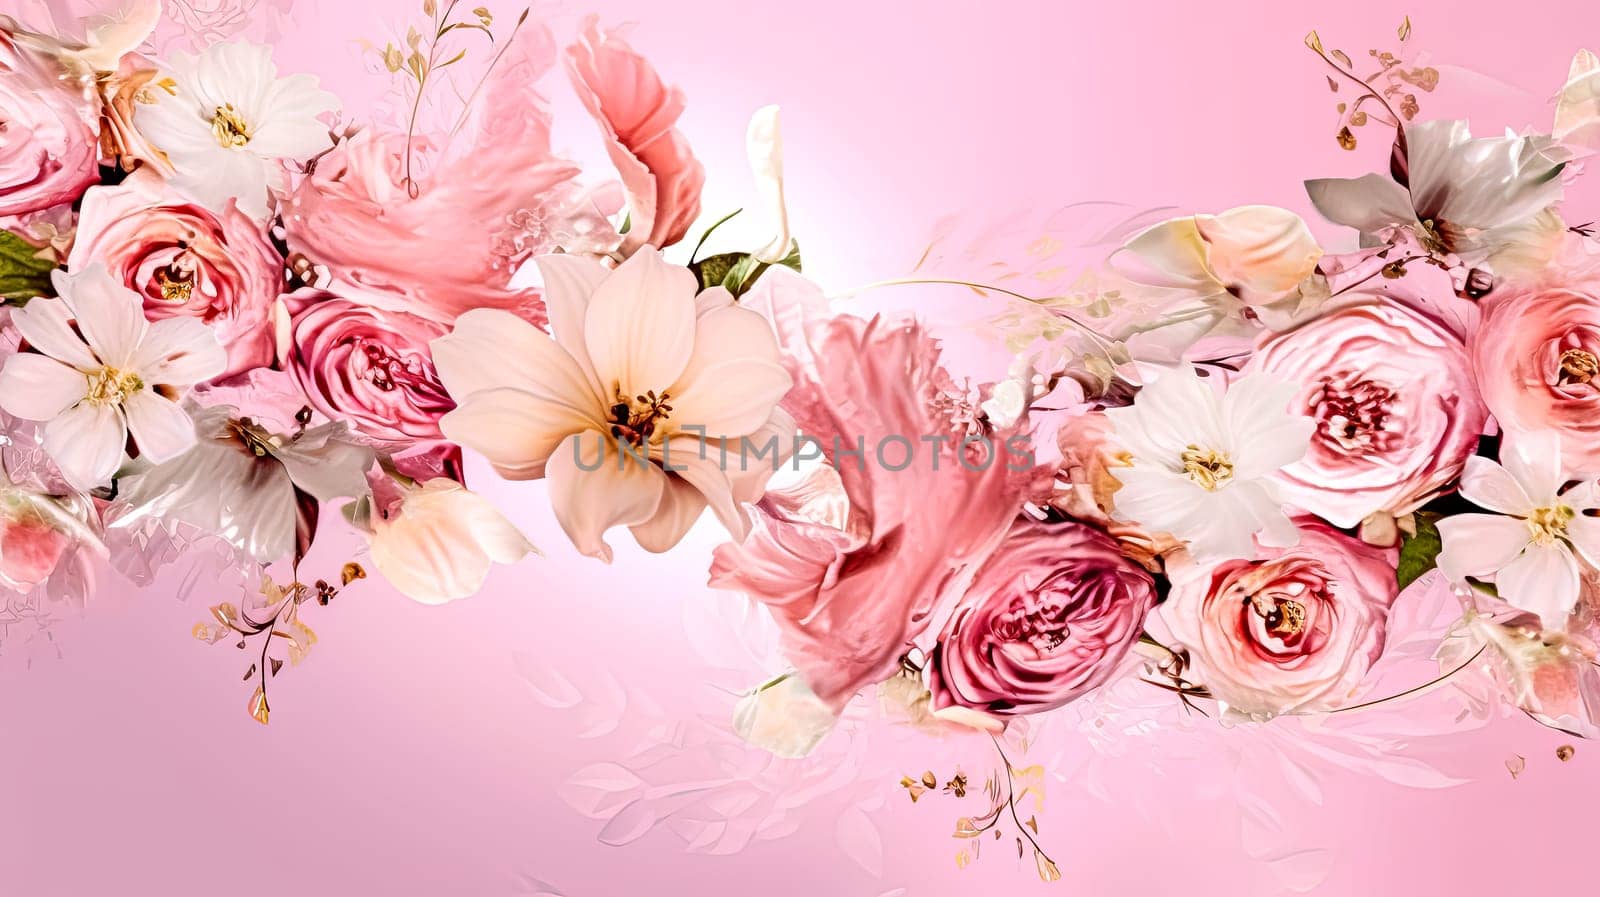 A colorful floral arrangement with pink and white flowers. The flowers are arranged in a way that creates a sense of movement and flow. Scene is one of beauty and serenity